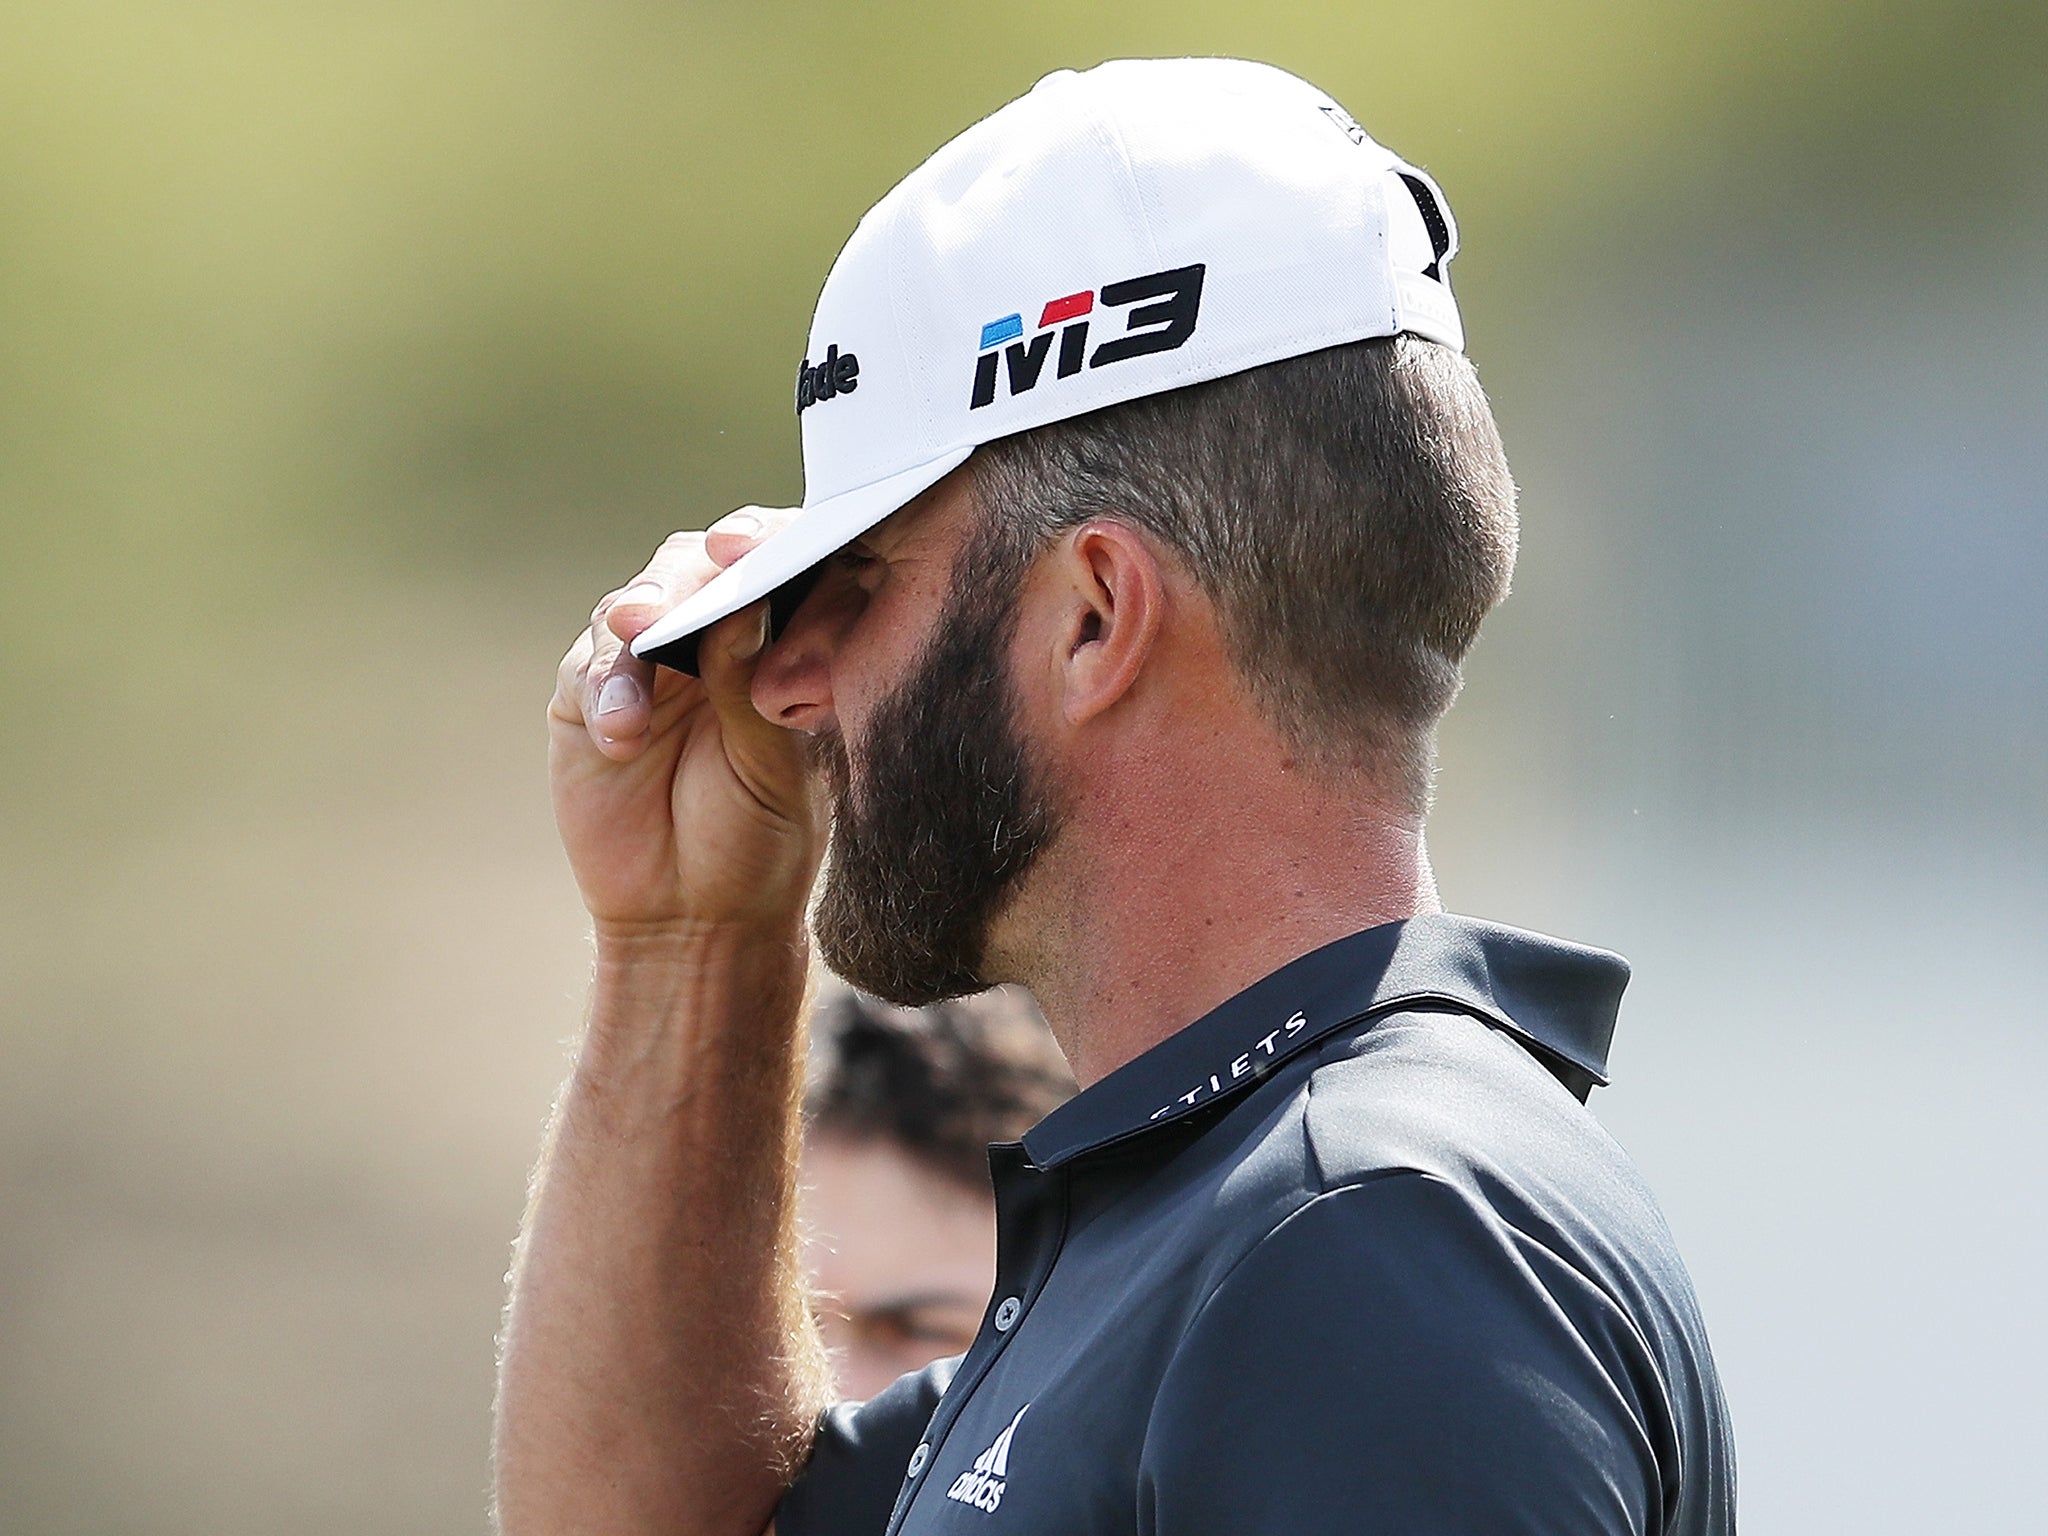 Dustin Johnson has been knocked out of the WGC World Match Play after consecutive defeats